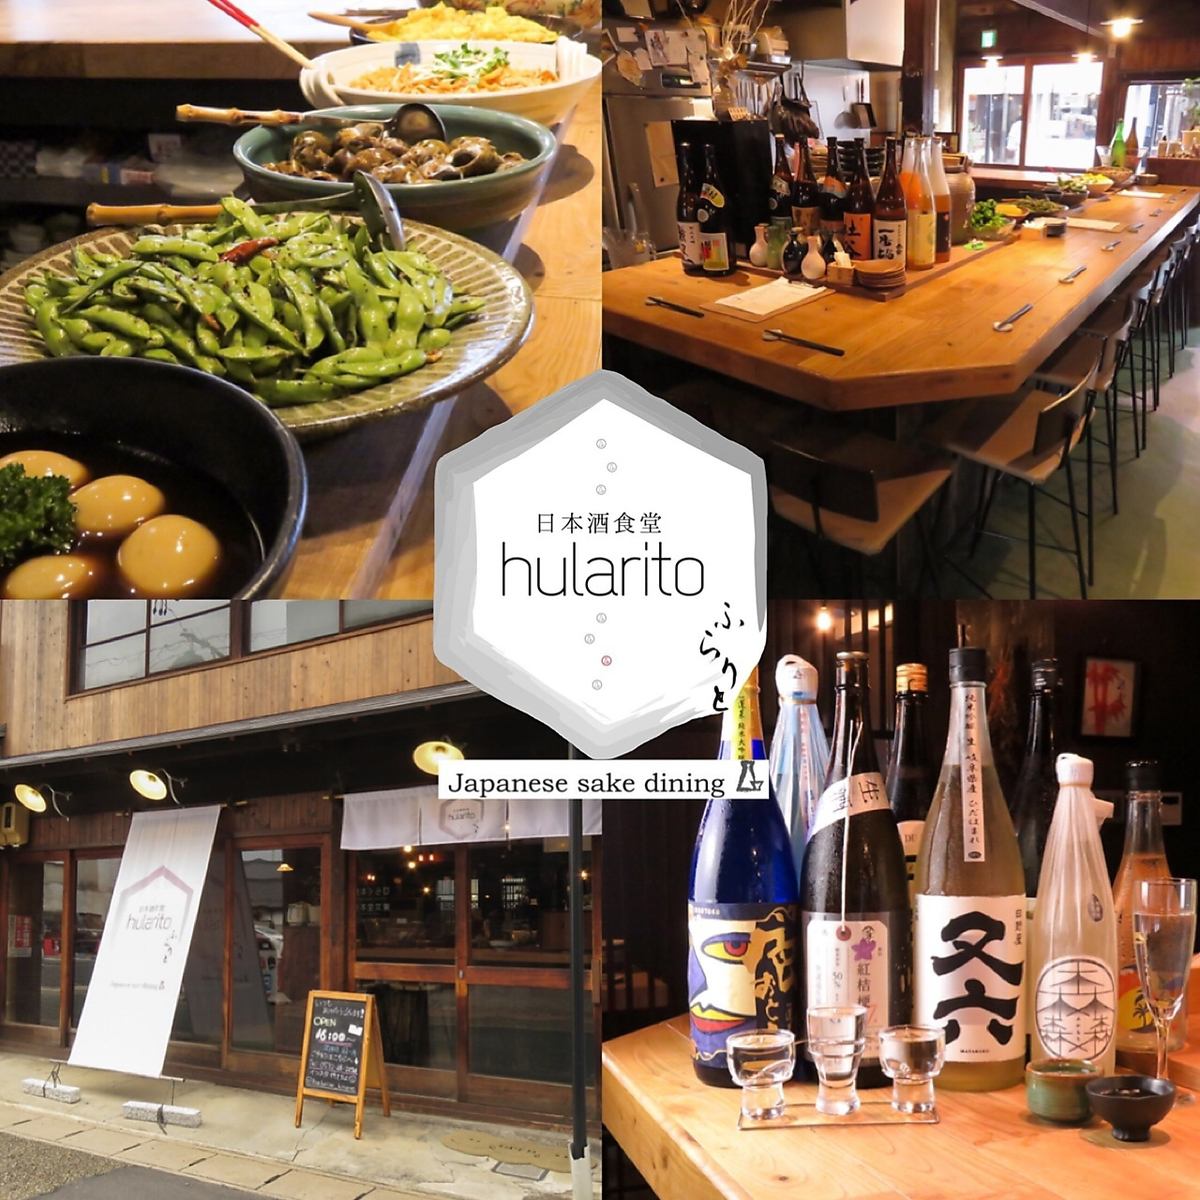 Enjoy carefully selected sake and side dishes in the atmosphere of a renovated old folk house.